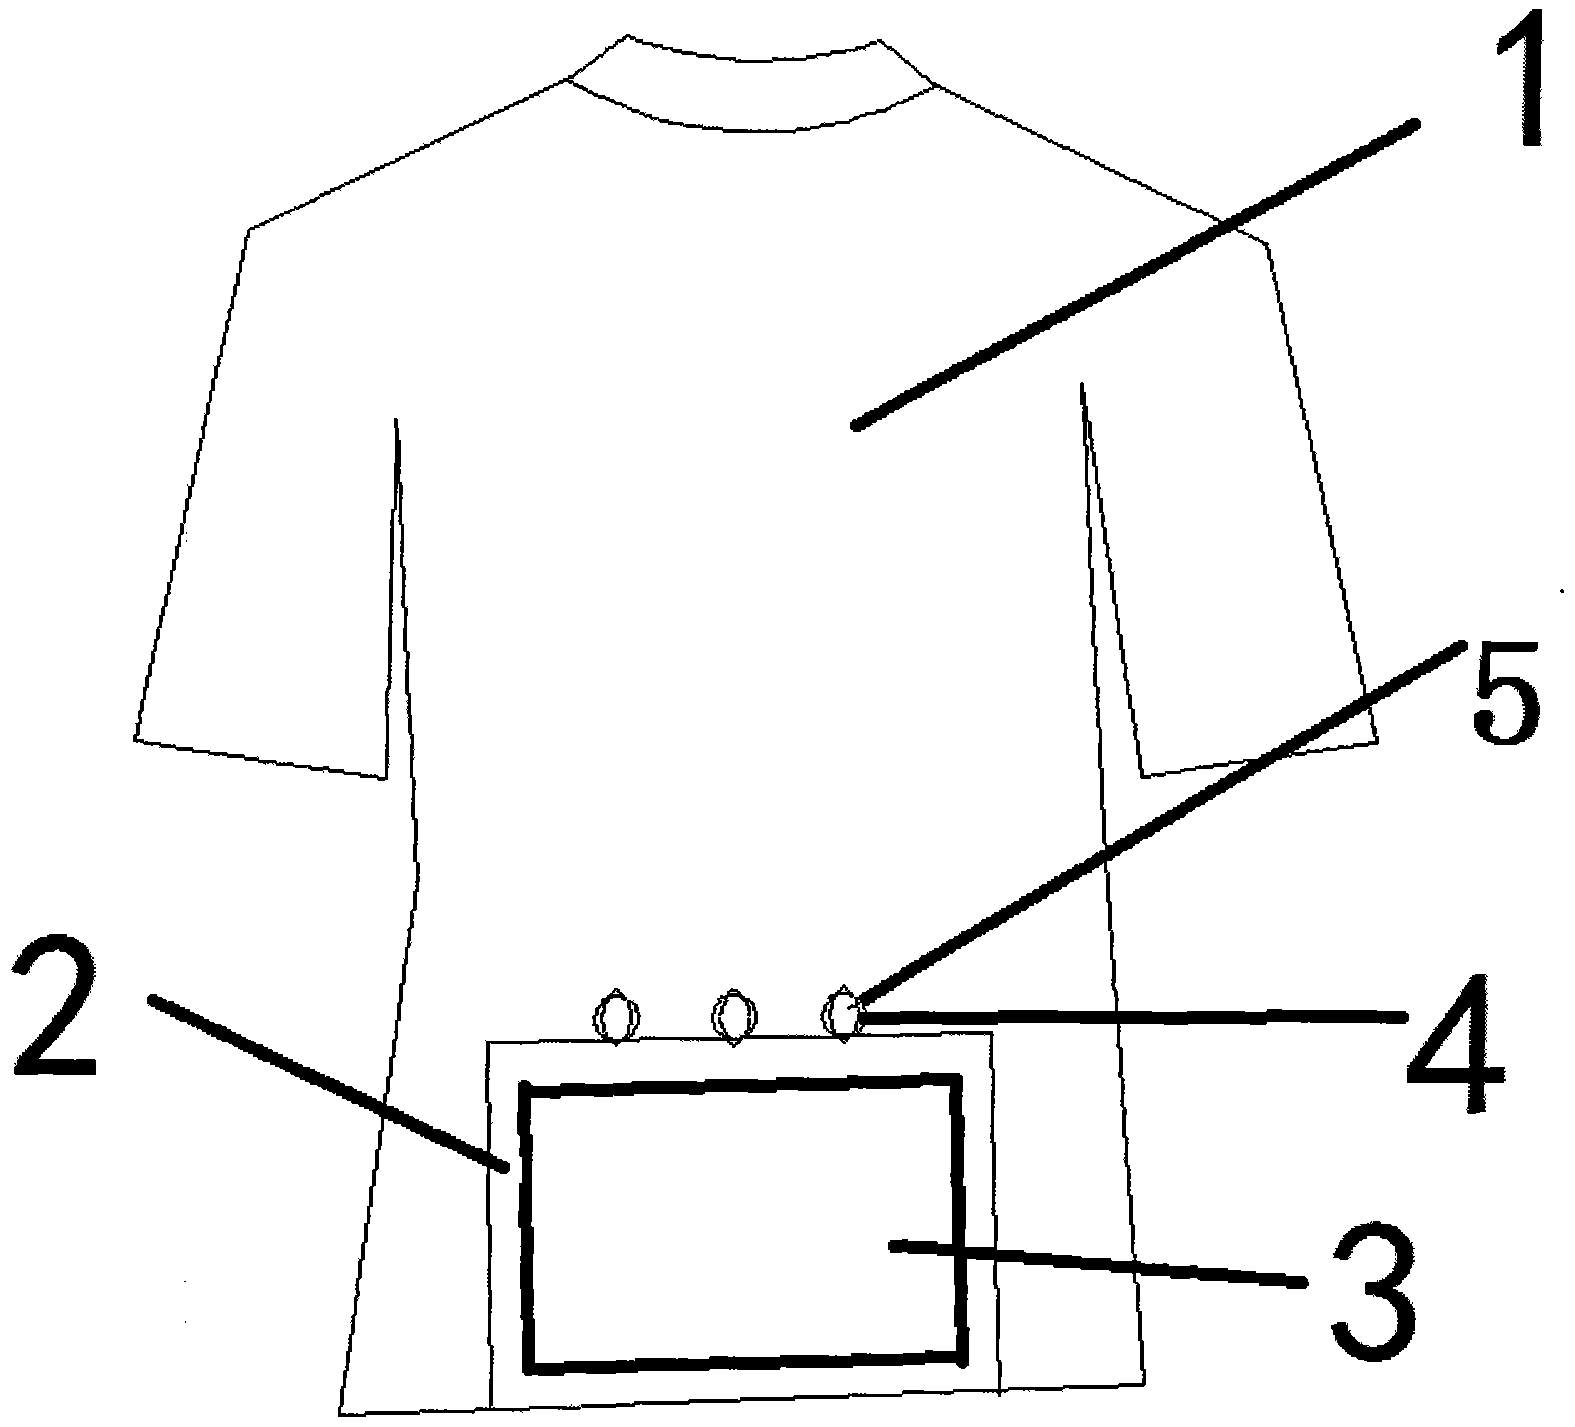 Highly heat-insulated garment with water cushion